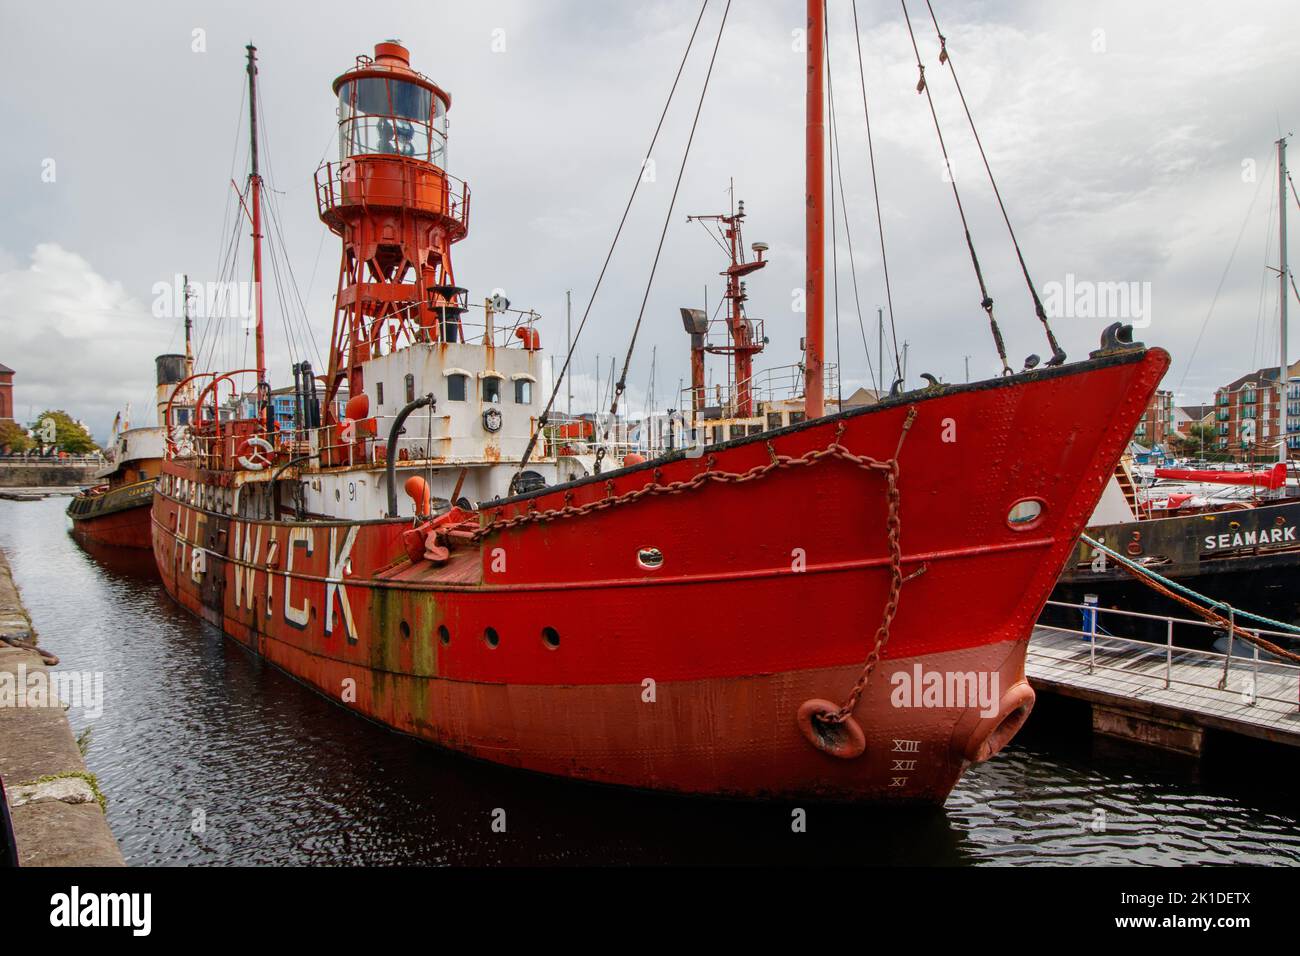 The Trinity House Lightship 91 Helwick moored along with Boats and yachts in Swansea Basin. Stock Photo